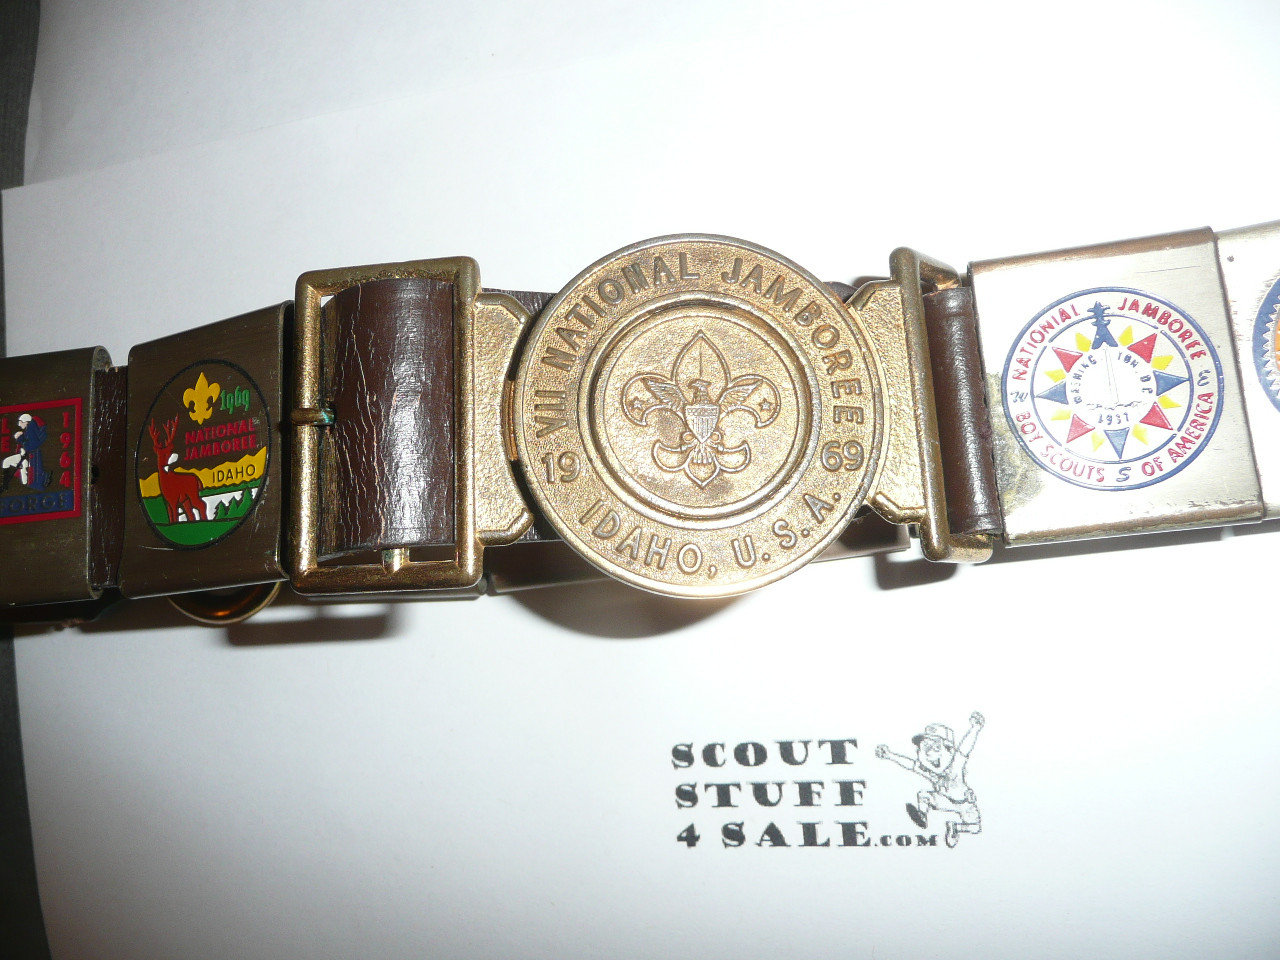 1969 National Jamboree Official leather Belt with Bronze Buckle and the complete NJ and Region belt loop sets, used